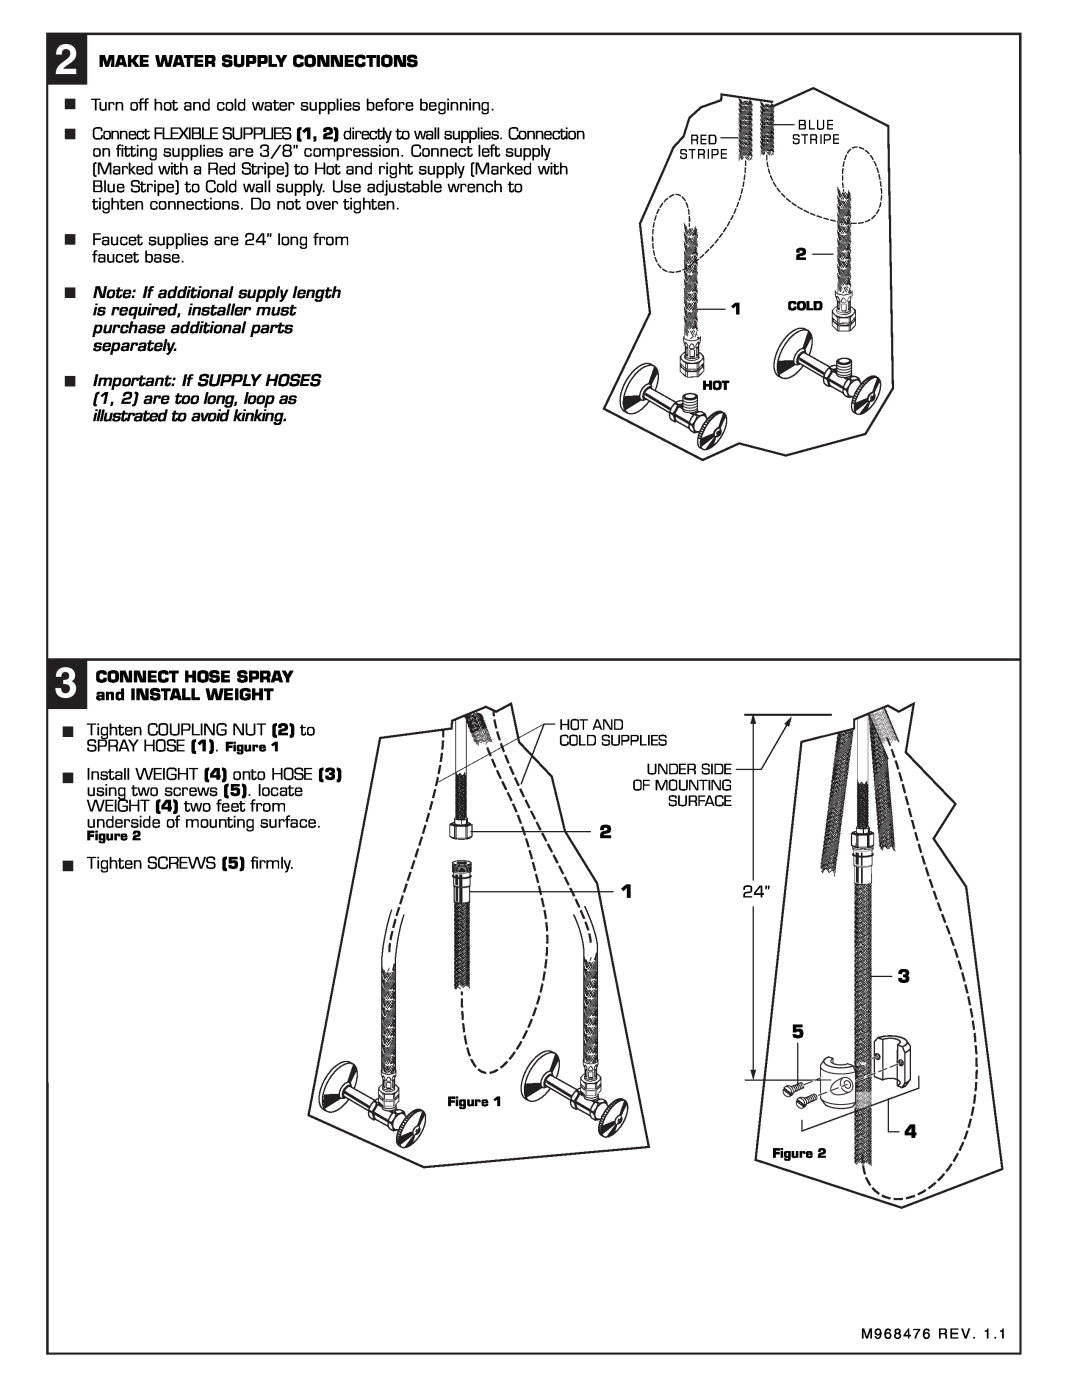 American Standard 4147.100 installation instructions Make Water Supply Connections, CONNECT HOSE SPRAY and INSTALL WEIGHT 